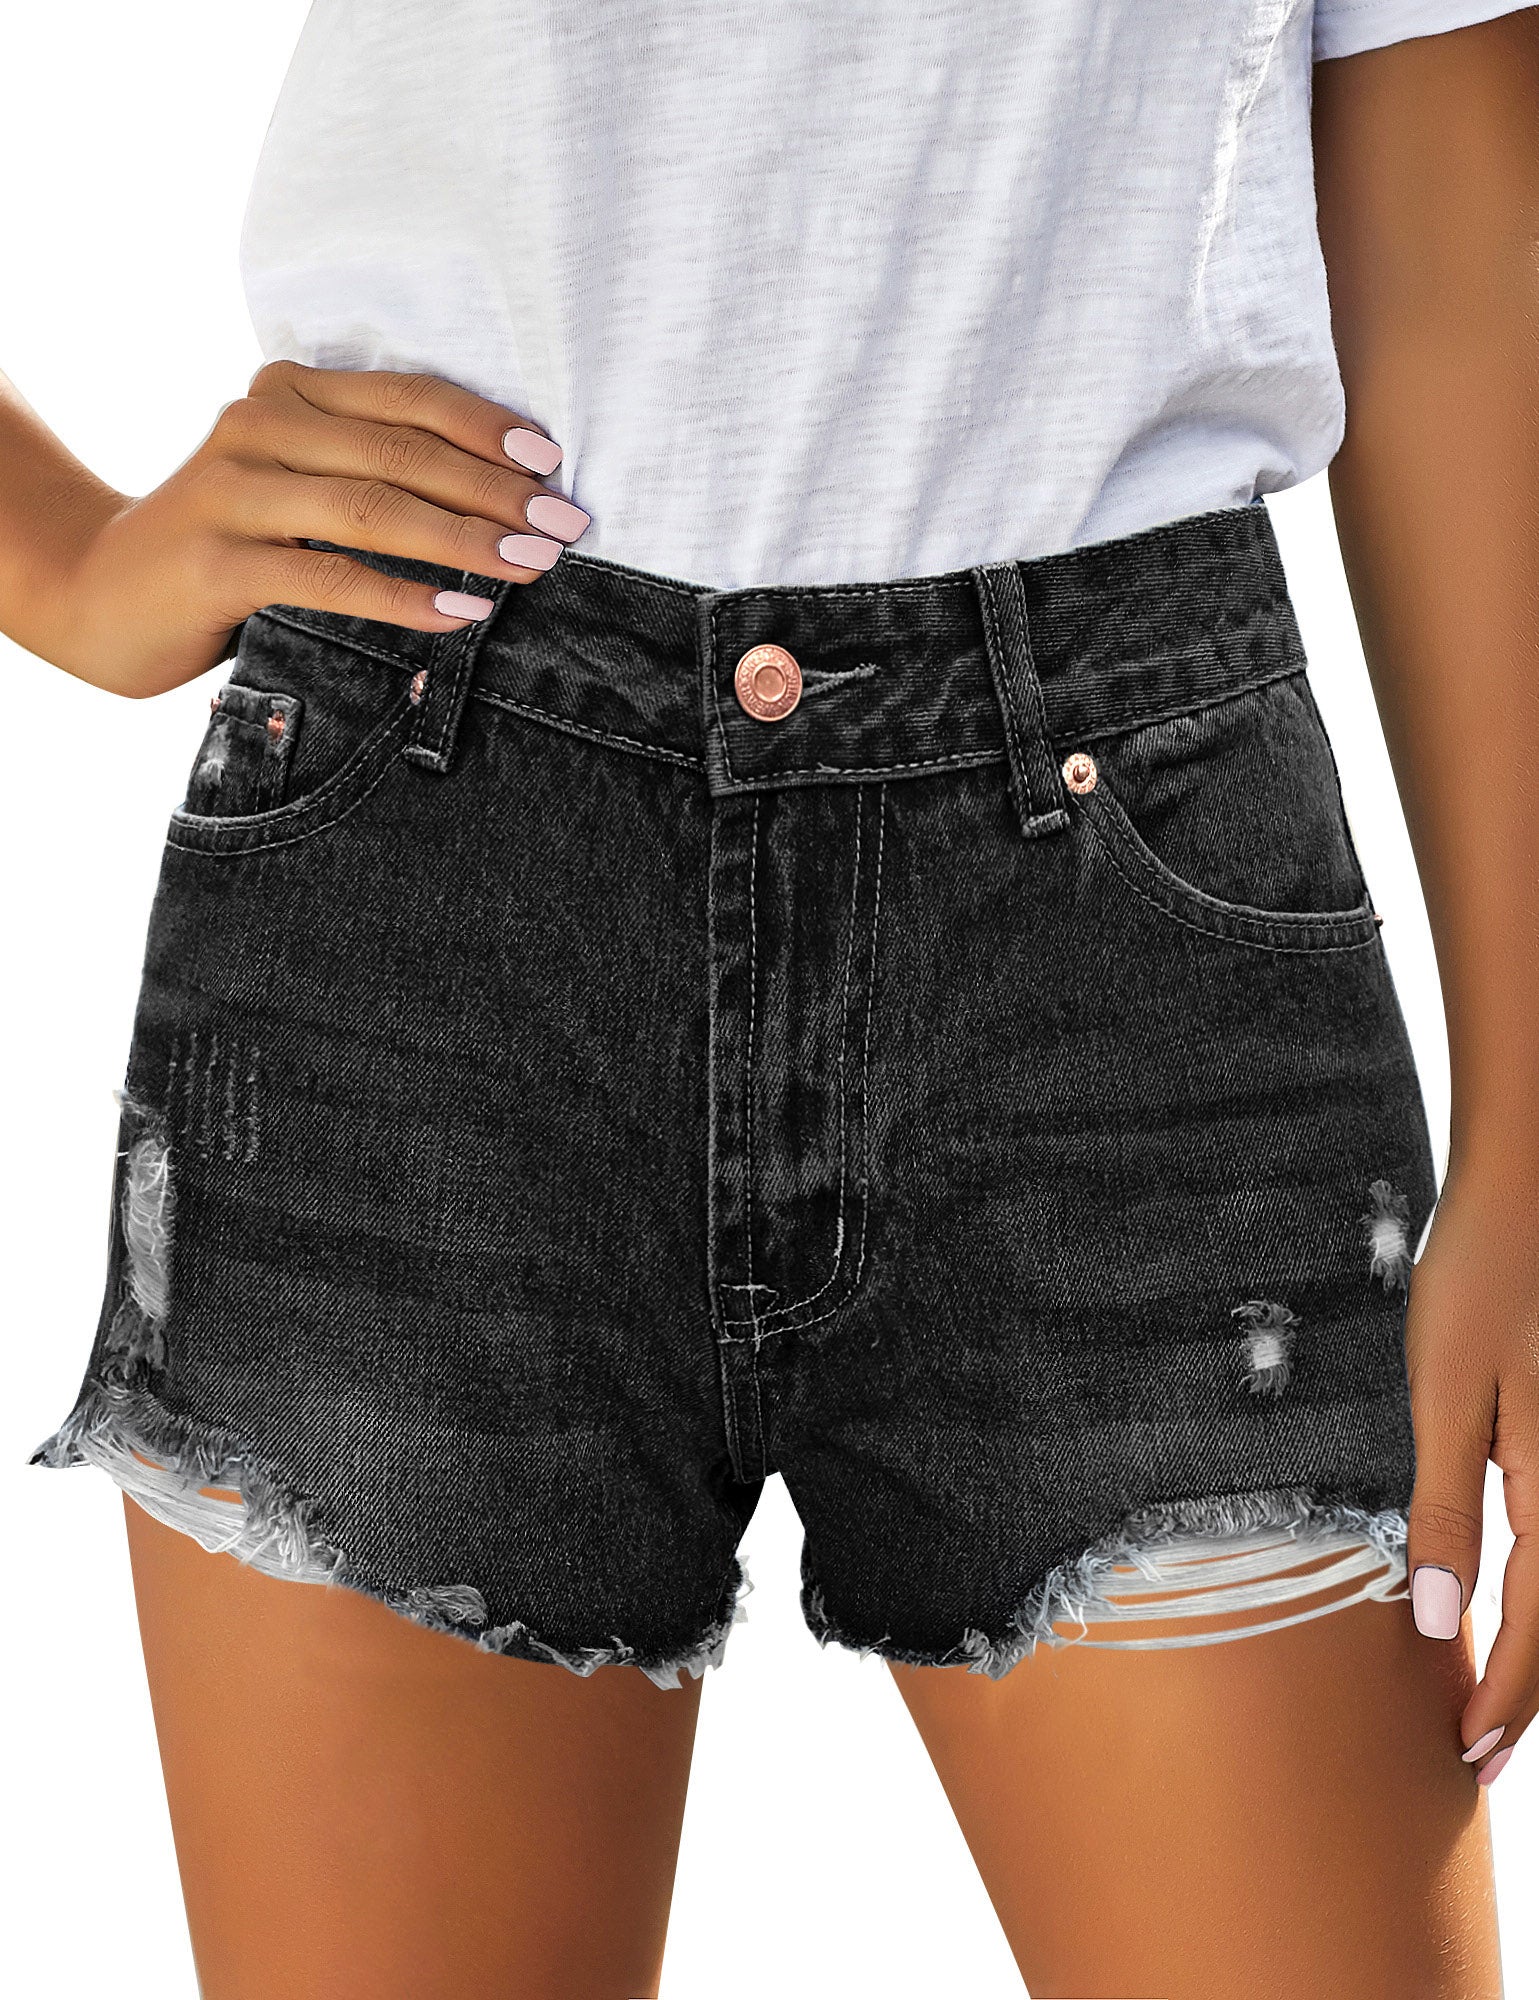 These Best-Selling Levi's Denim Shorts Are Trending and on Sale at Amazon